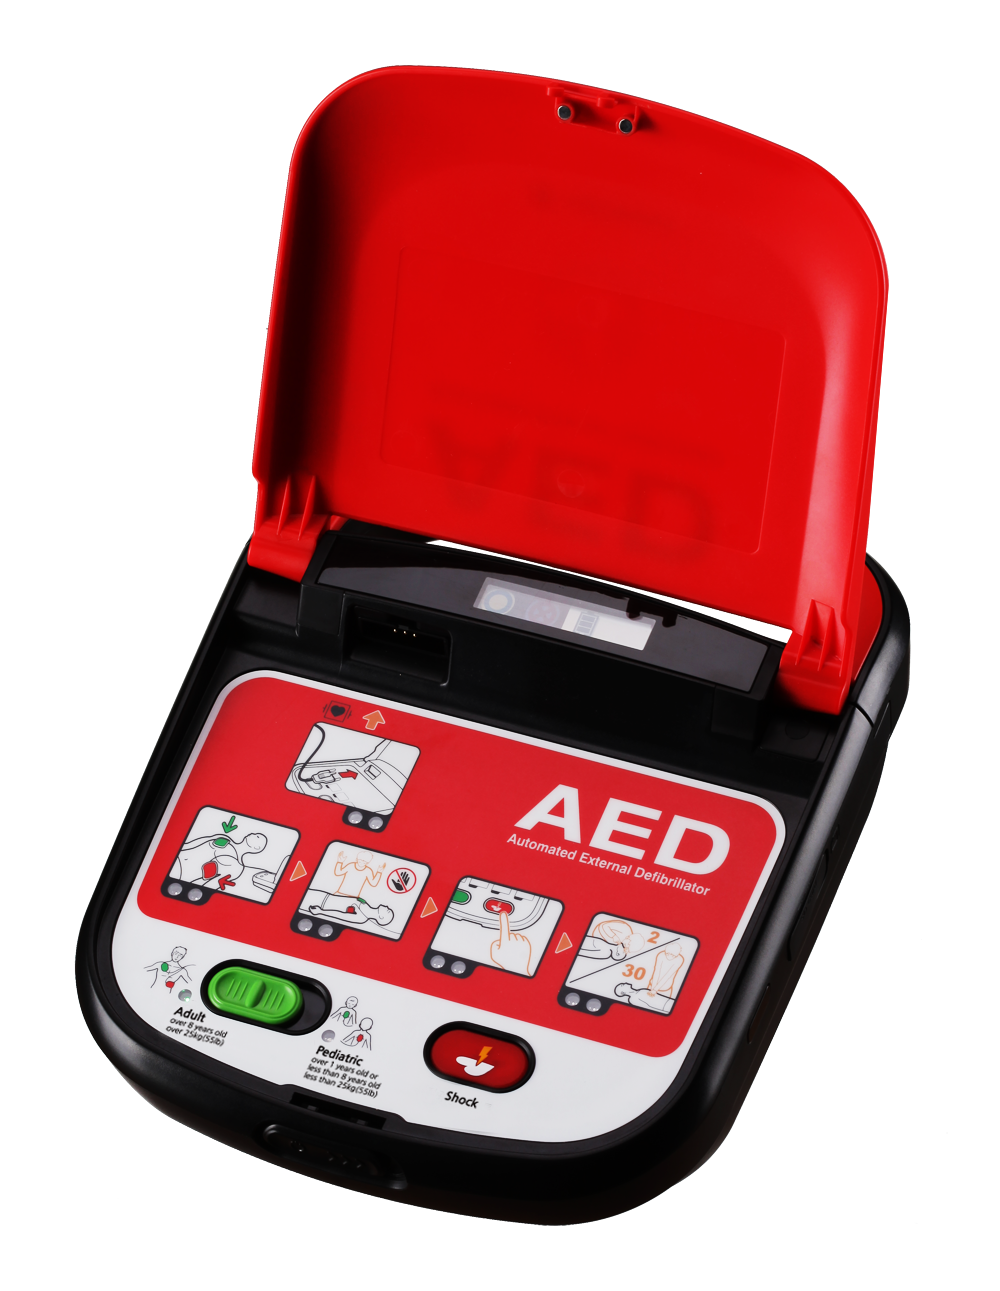 Mediana A15 Adult/Child Defibrillator Package | With Alarmed Wall Cabinet